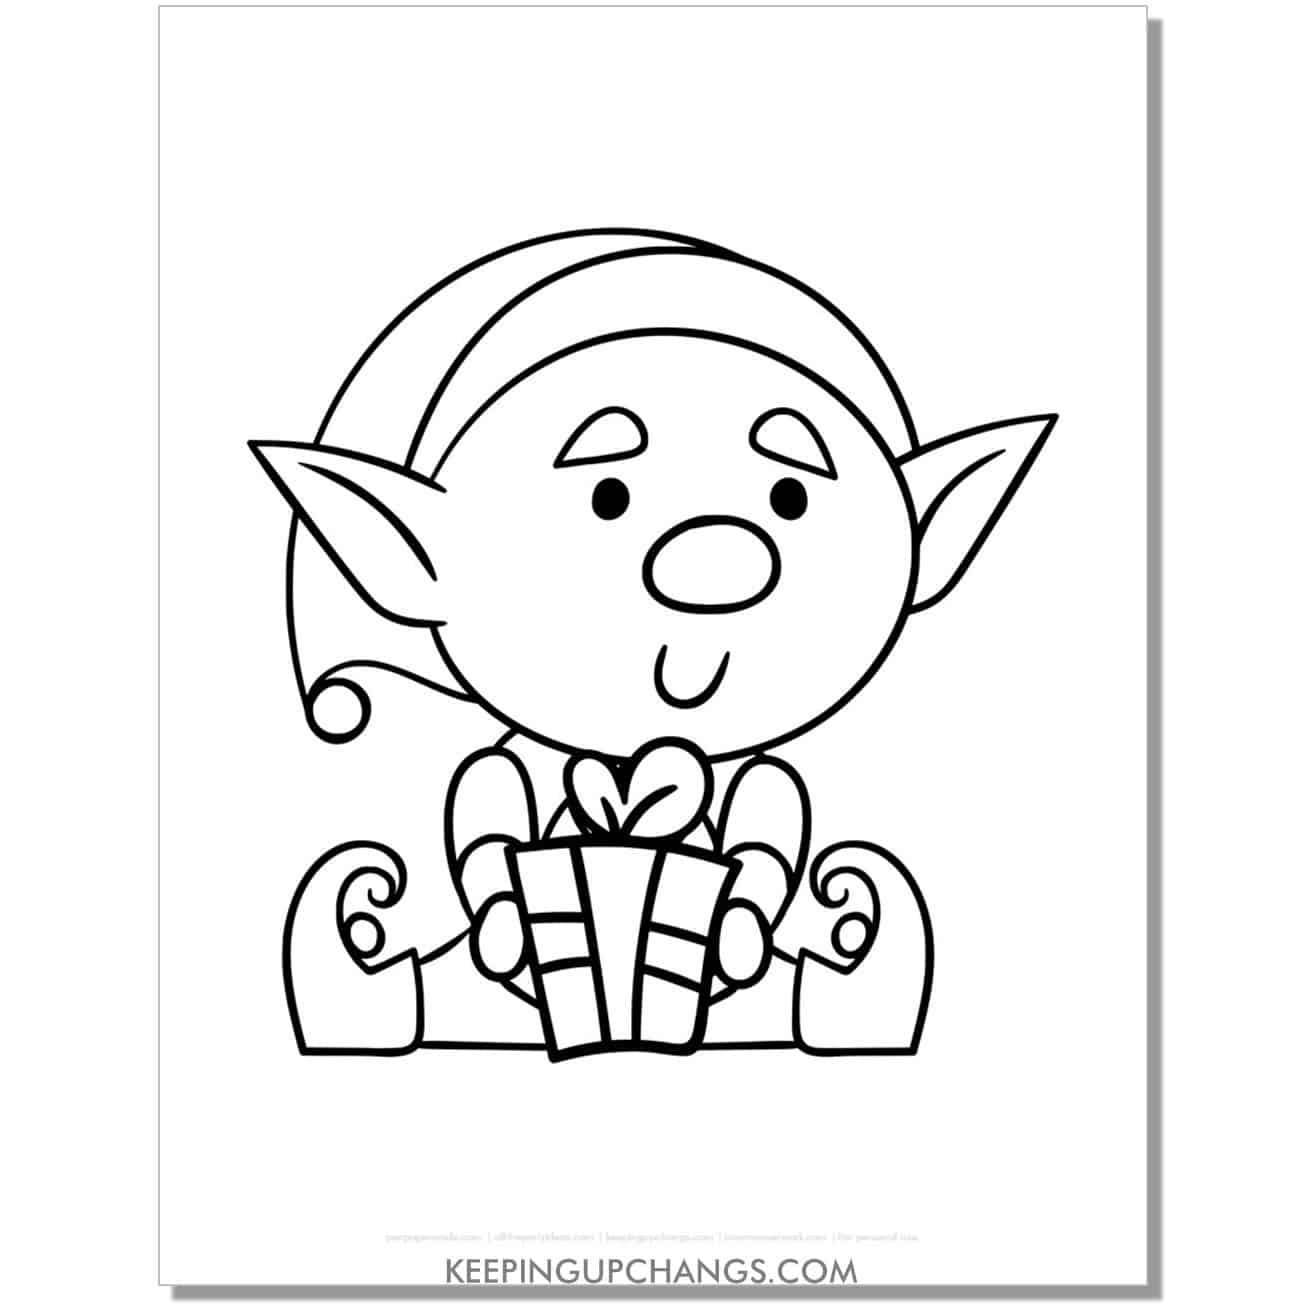 free adorable sitting christmas elf holding gift coloring page.